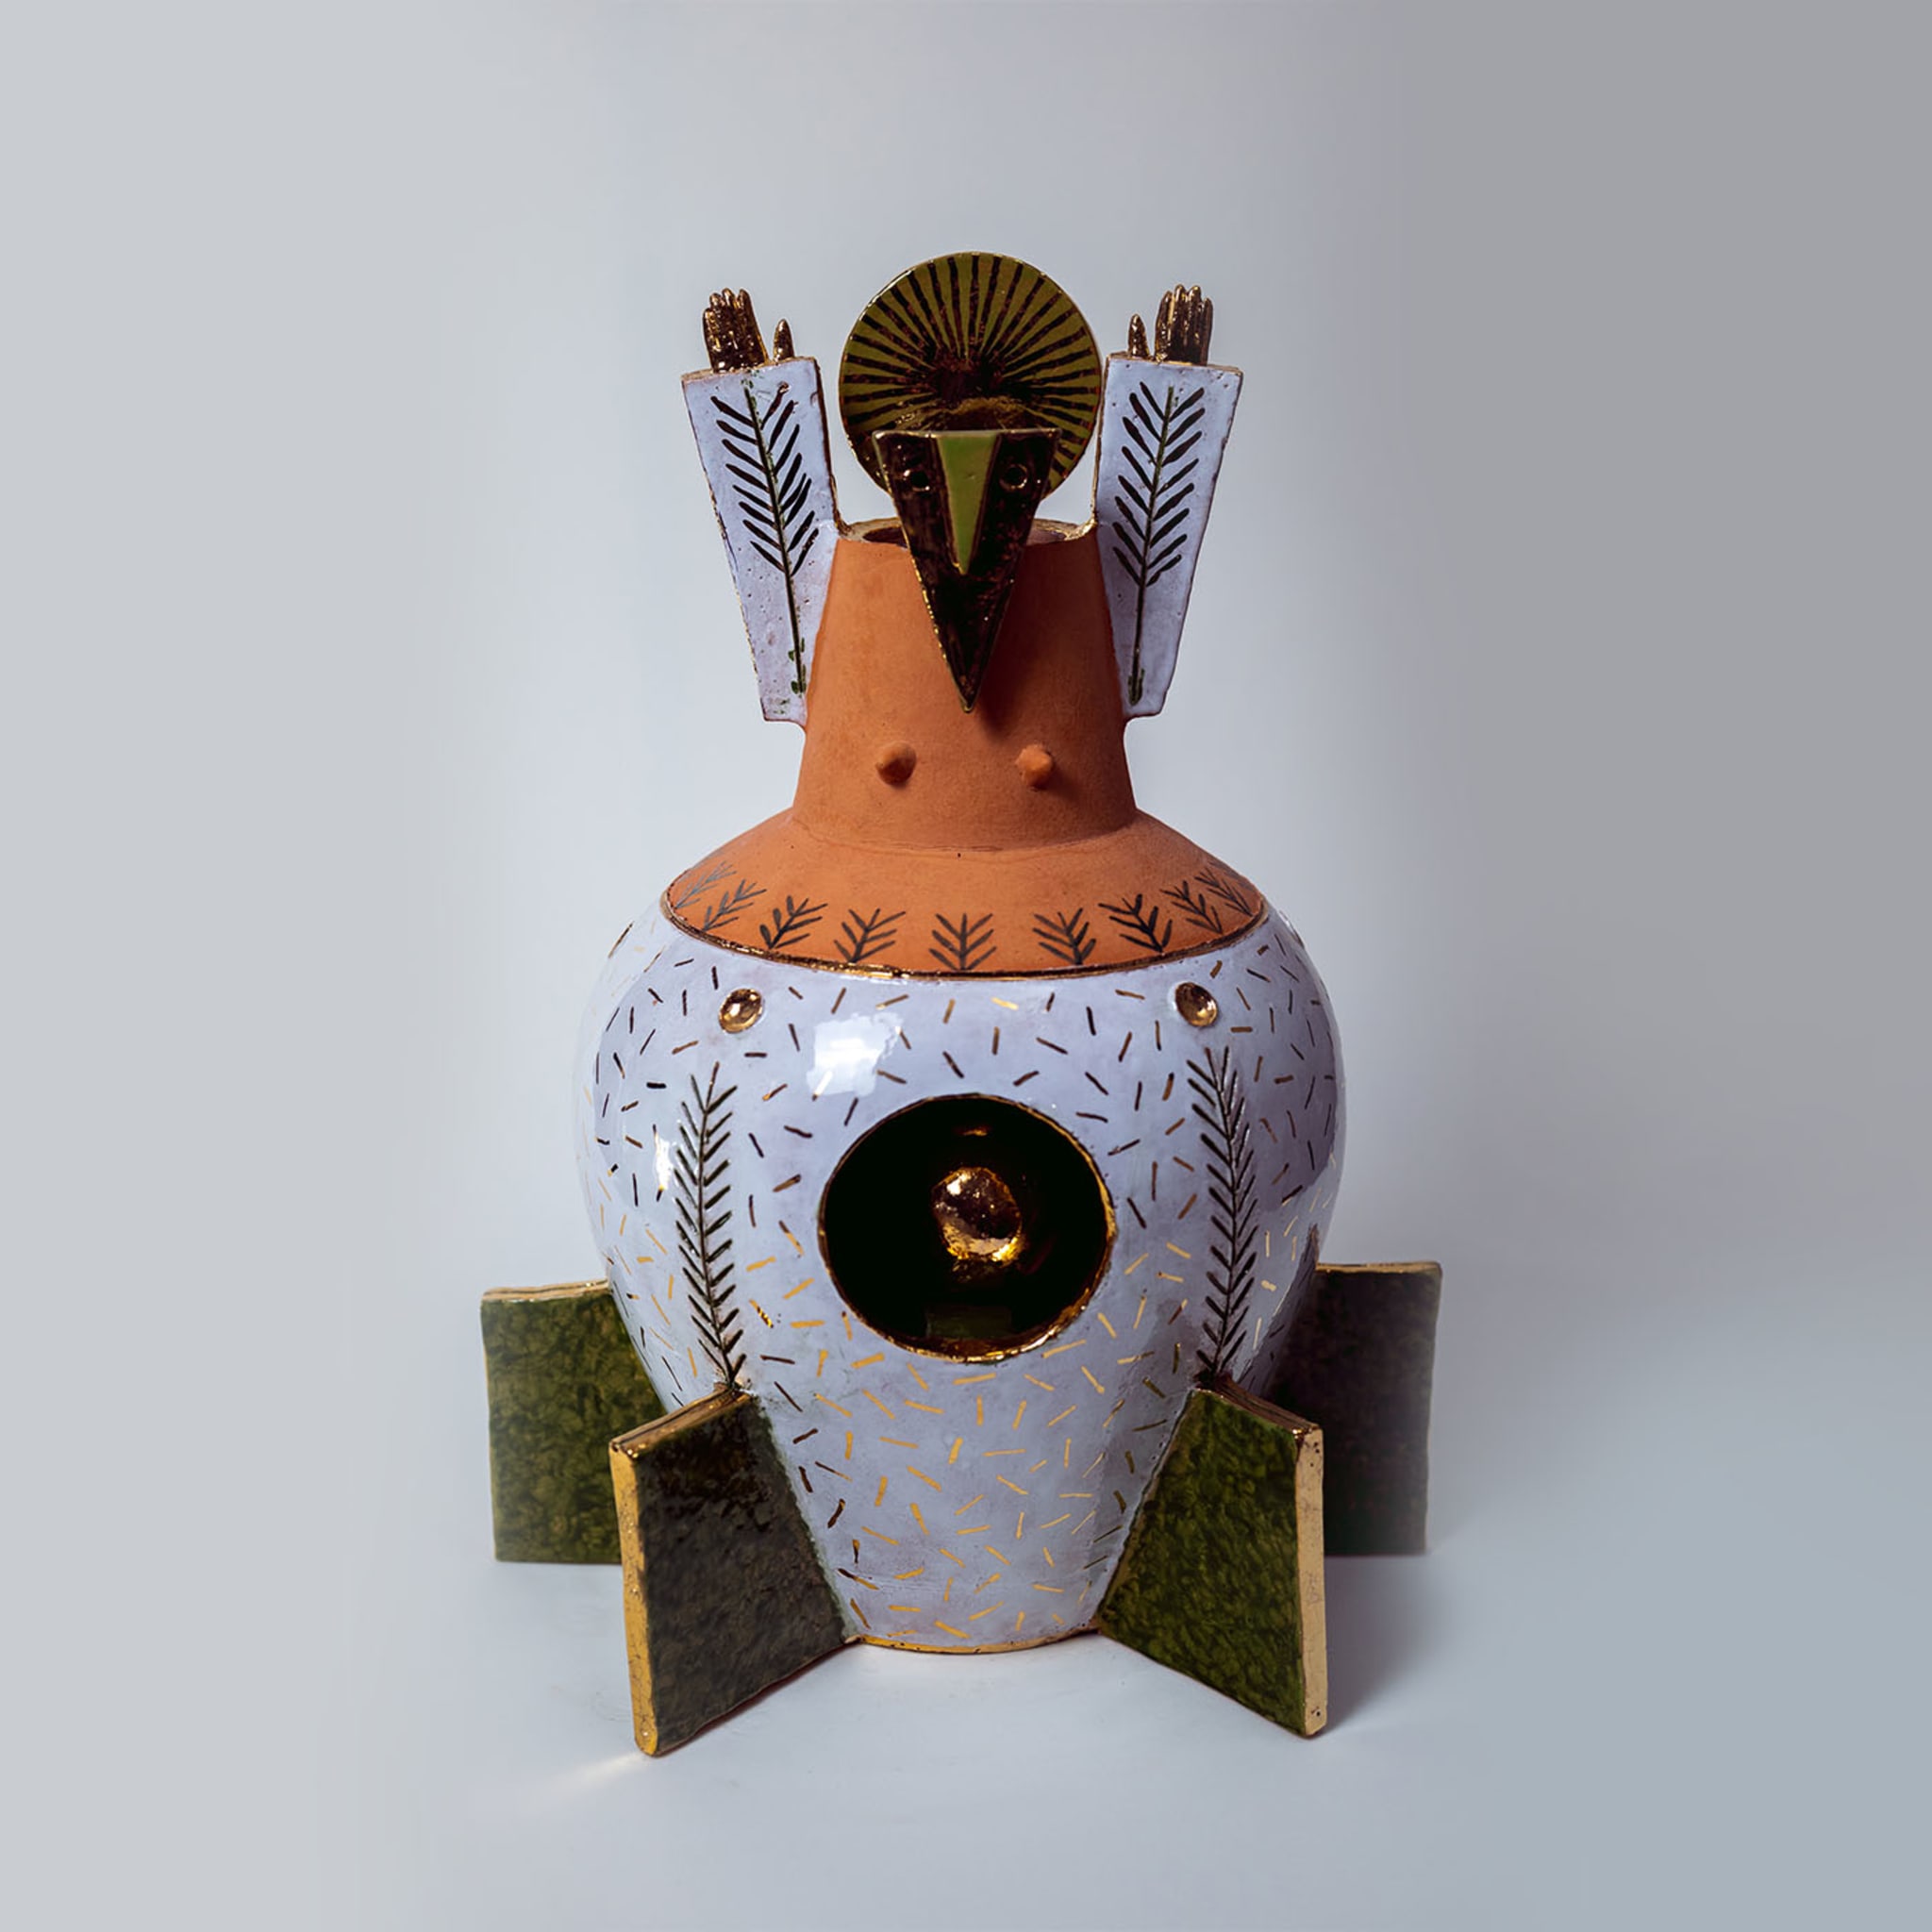 The Lord of Sun Polychrome Sculpture - Alternative view 1